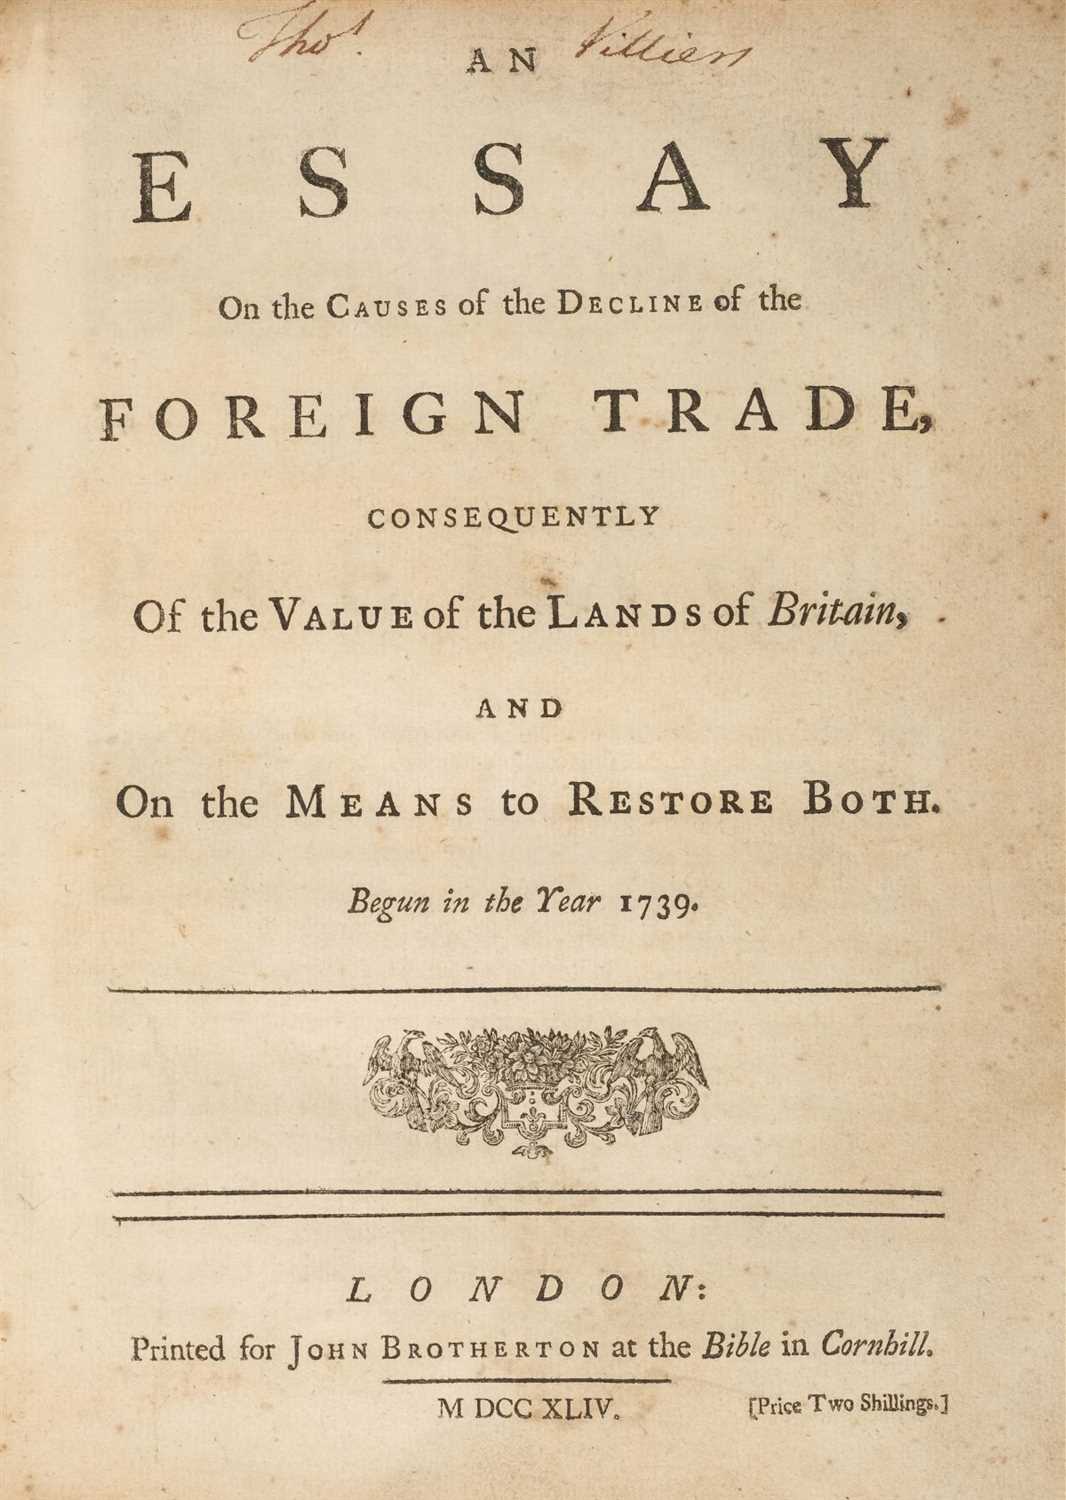 Lot 190 - Decker (Matthew). An Essay on the Causes of the Decline of the Foreign Trade, 1st edition, 1744